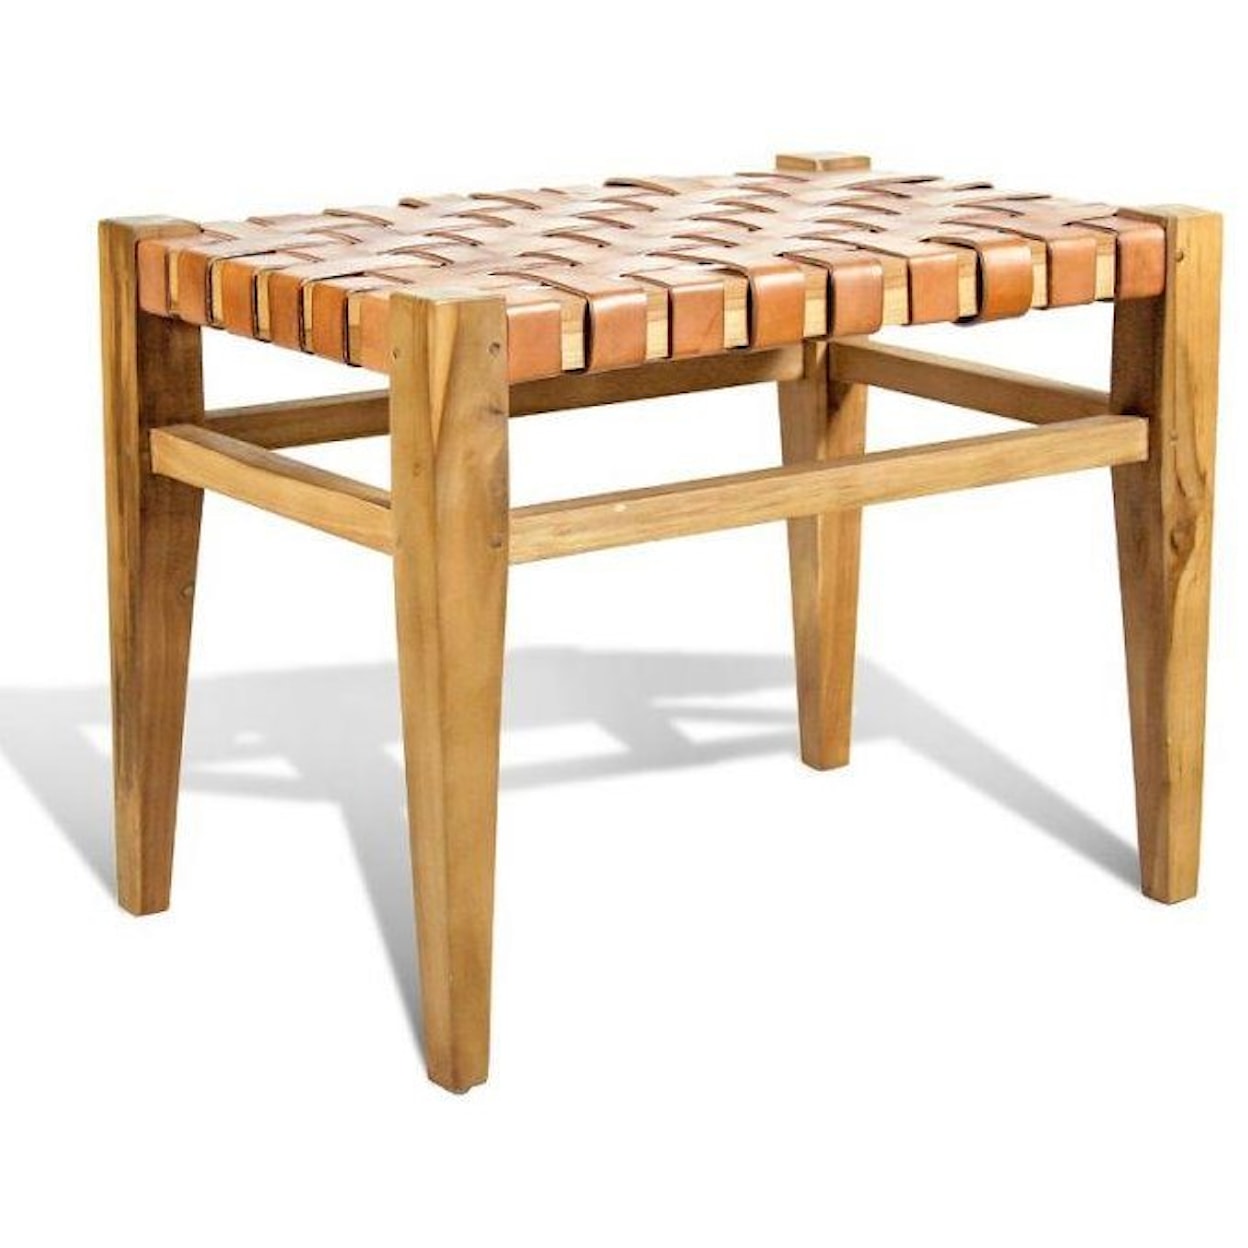 Ibolili Stools and Benches Bench